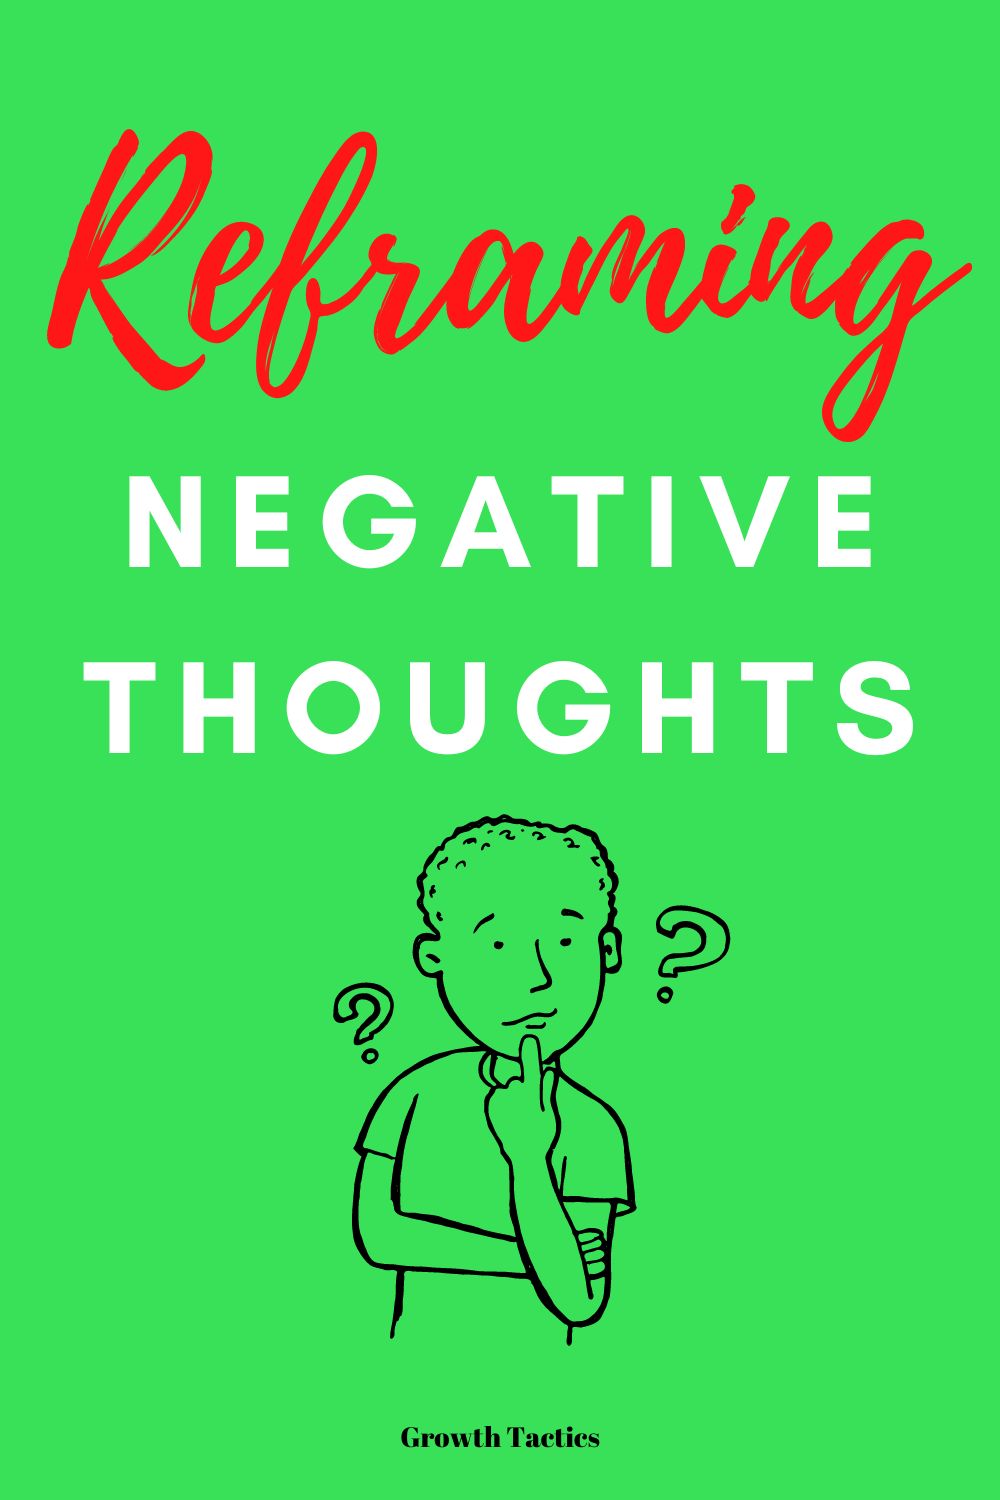 Reframing Negative Thoughts w/ Examples (Be Happier)